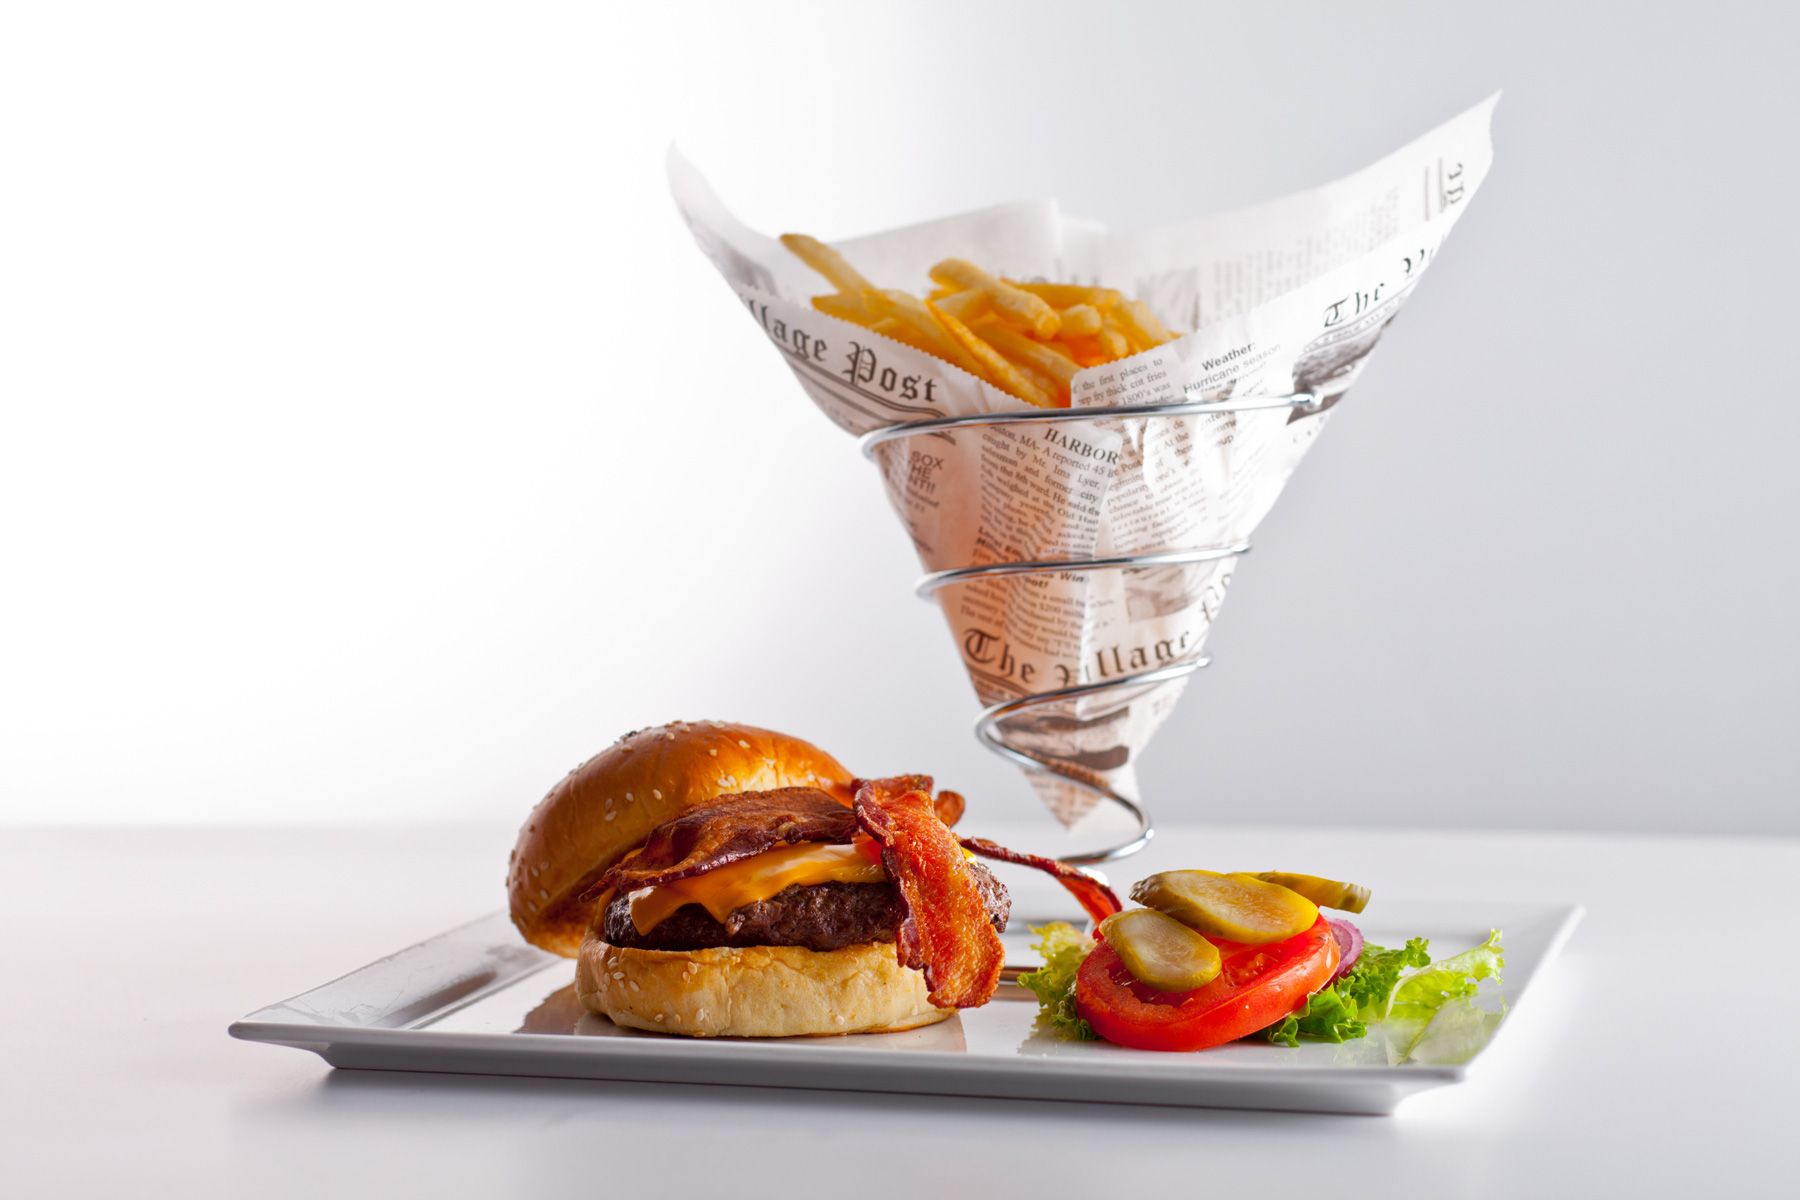 Bacon-Hamburger-with-french-fries-in-newspaper-cone.jpg